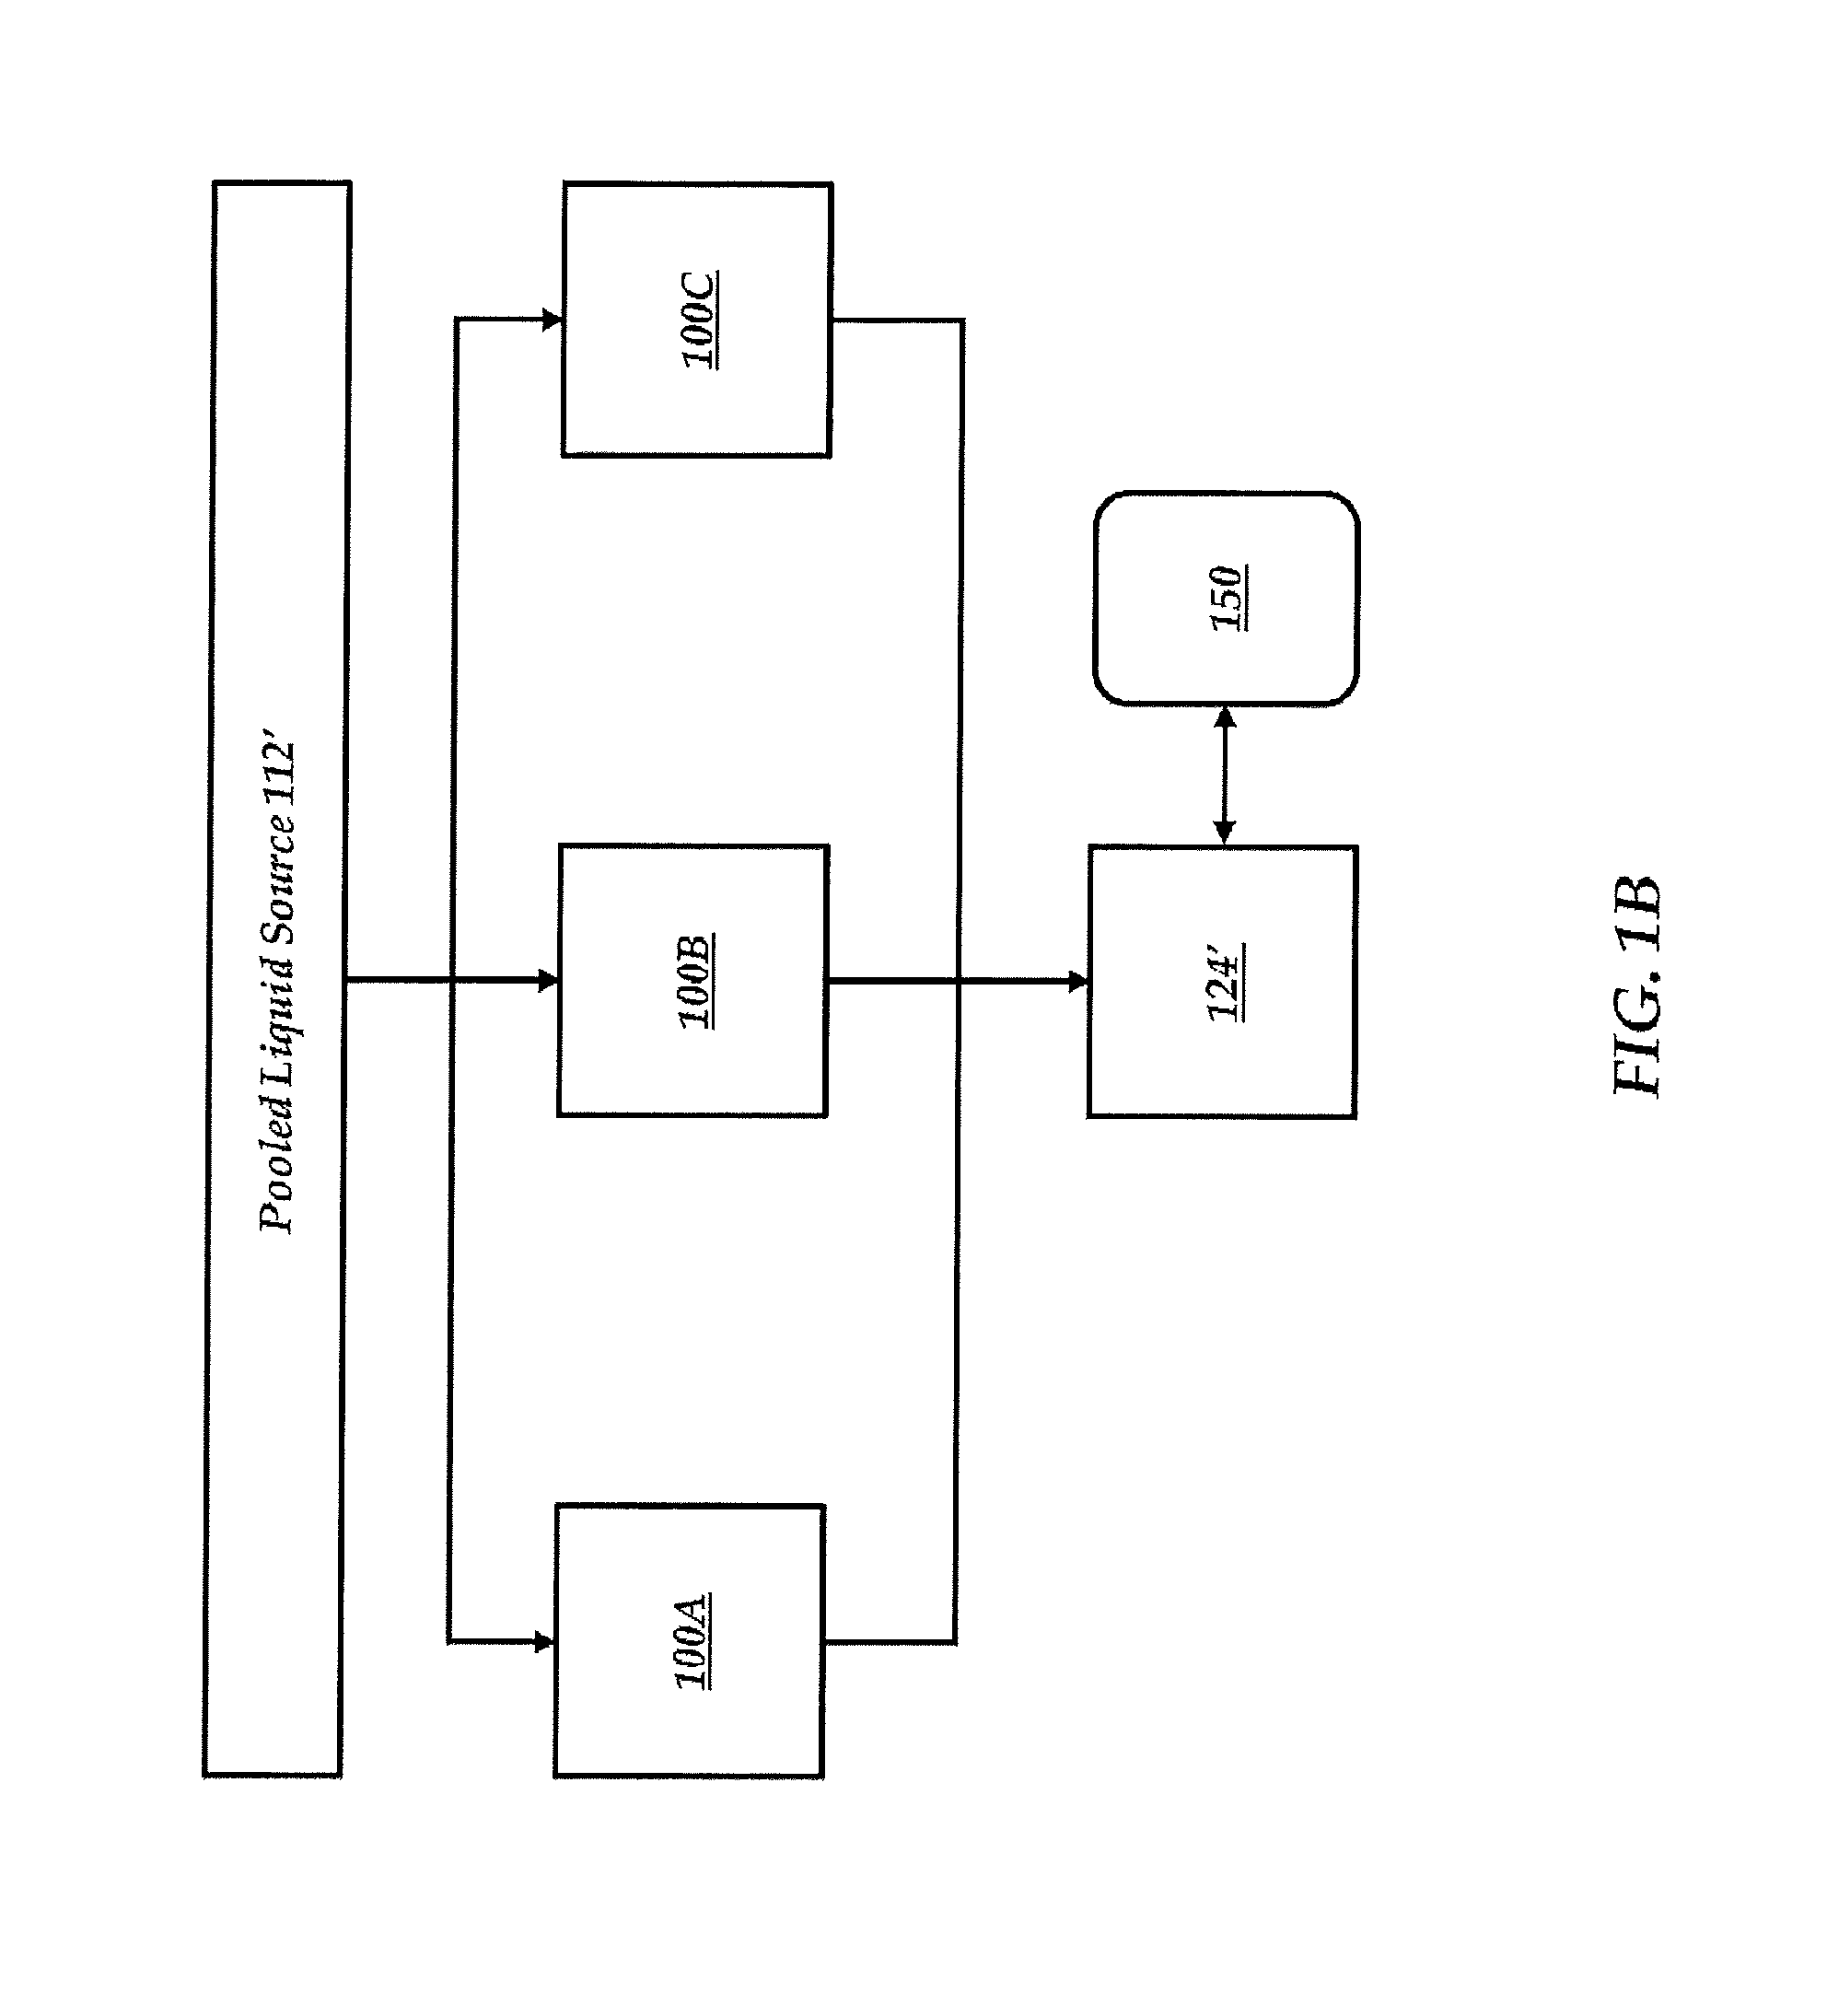 Formulations and methods for contemporaneous stabilization of active proteins during spray drying and storage